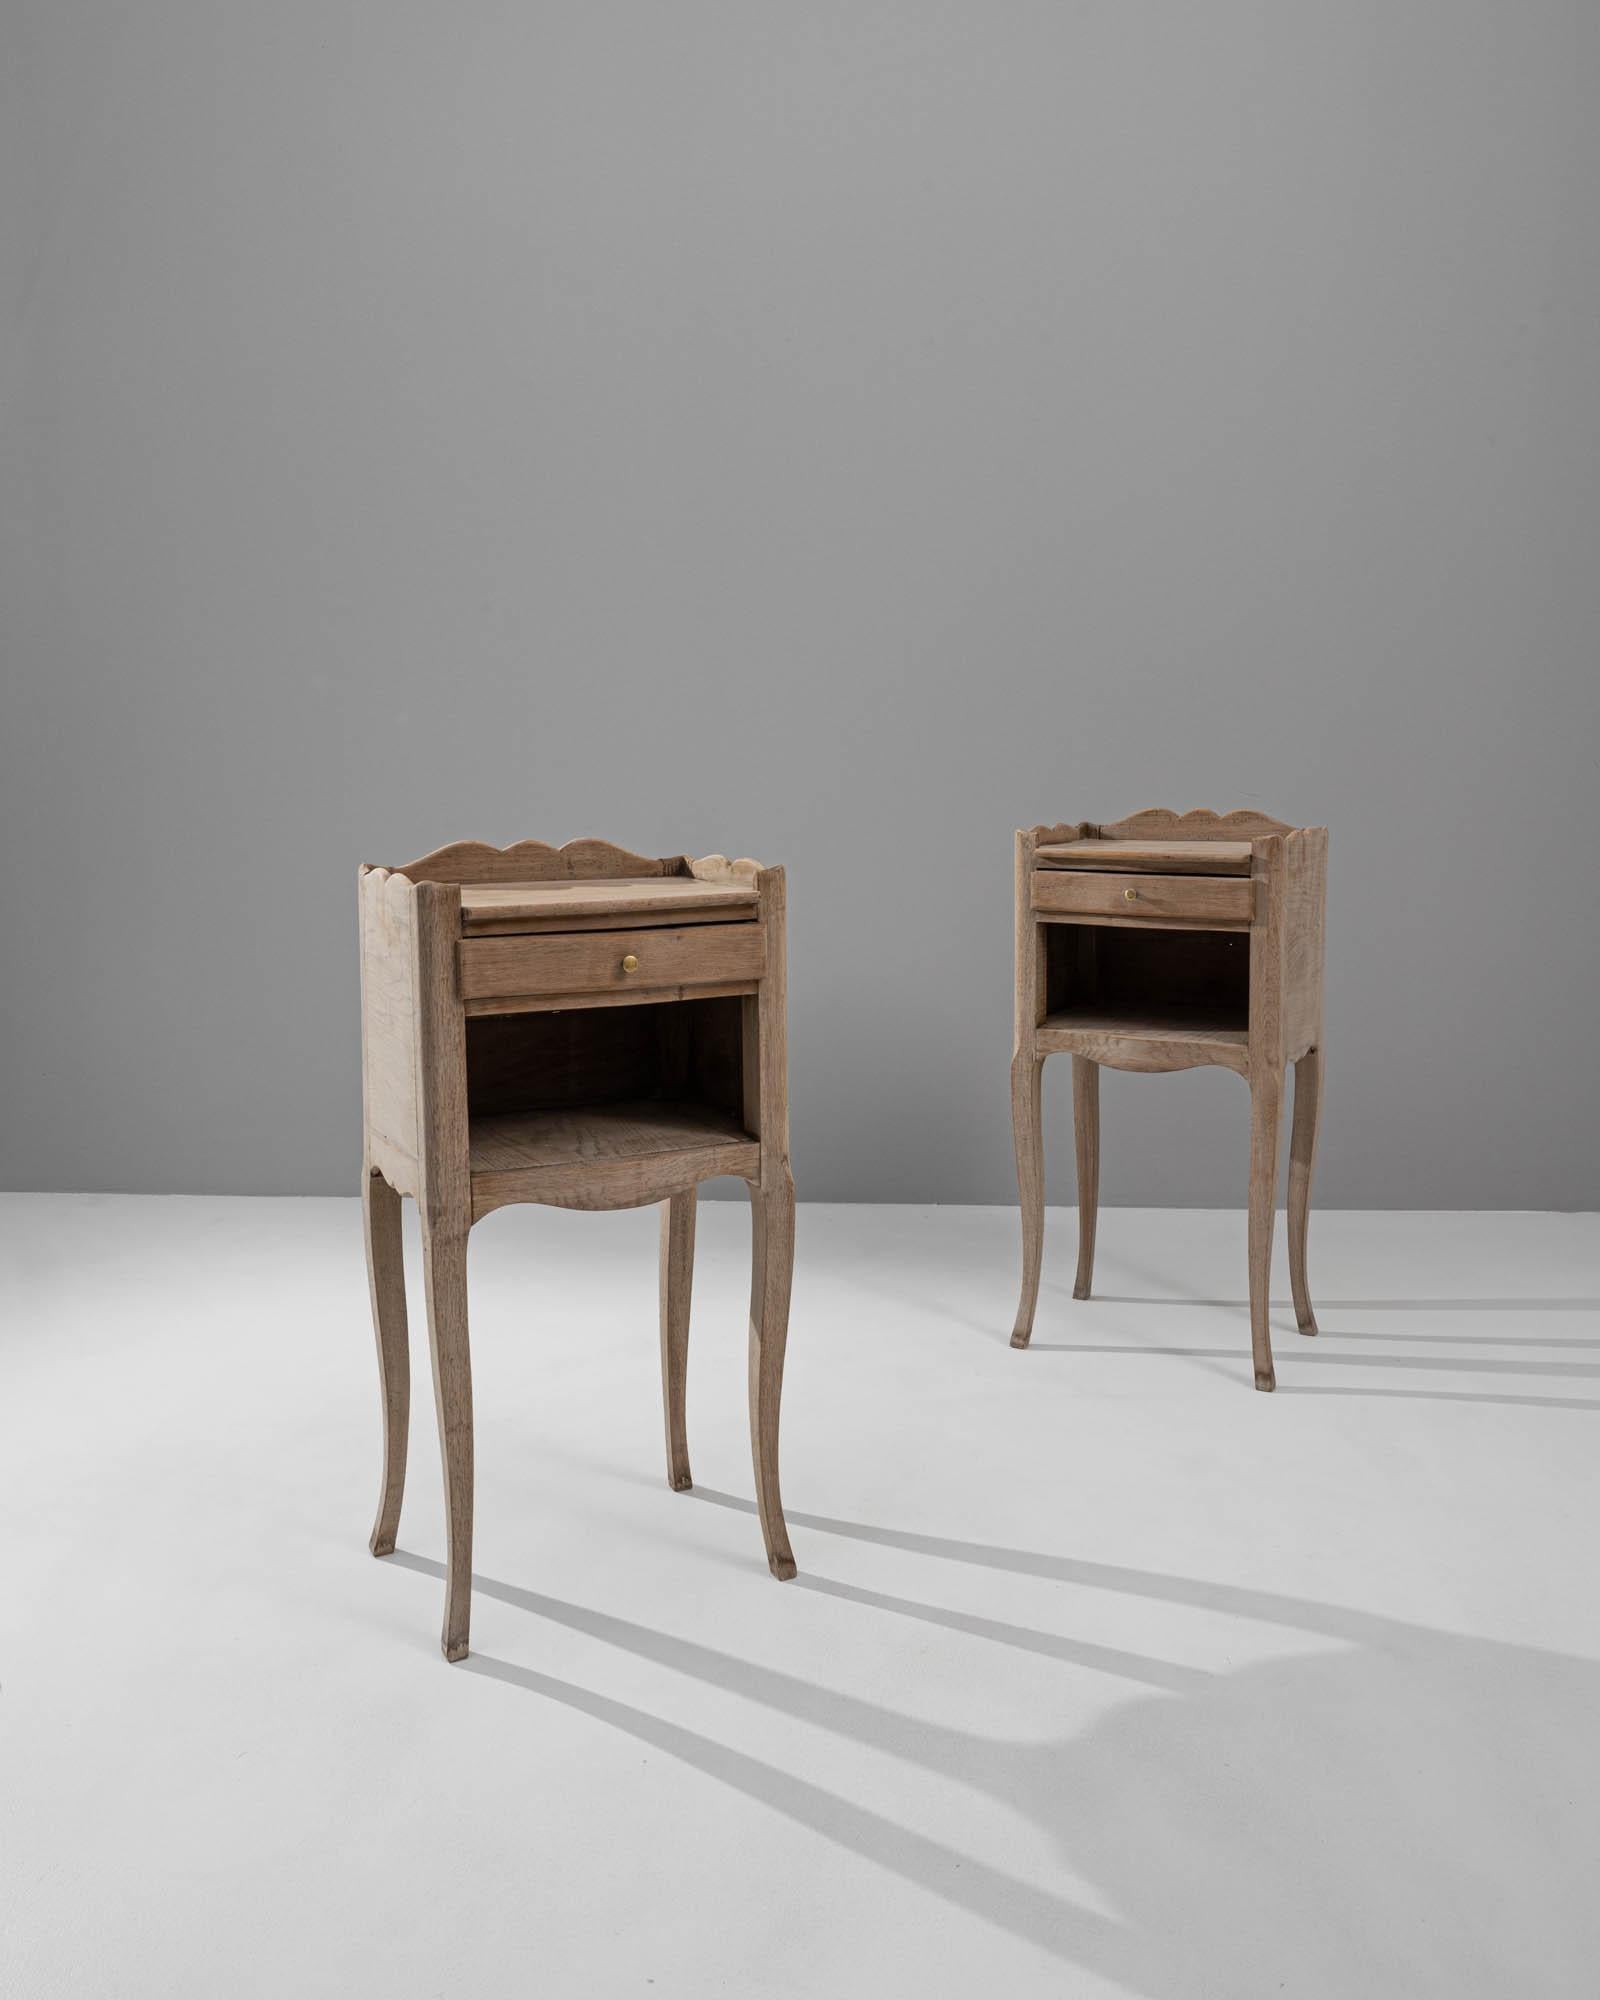 A pair of wooden side tables created in 1900s France. Petite, elegantly shaped, and brightly colored, this pair of side tables presents a neatly composed vision of craft and grace. The surface of the oak has been treated with a delicate bleaching